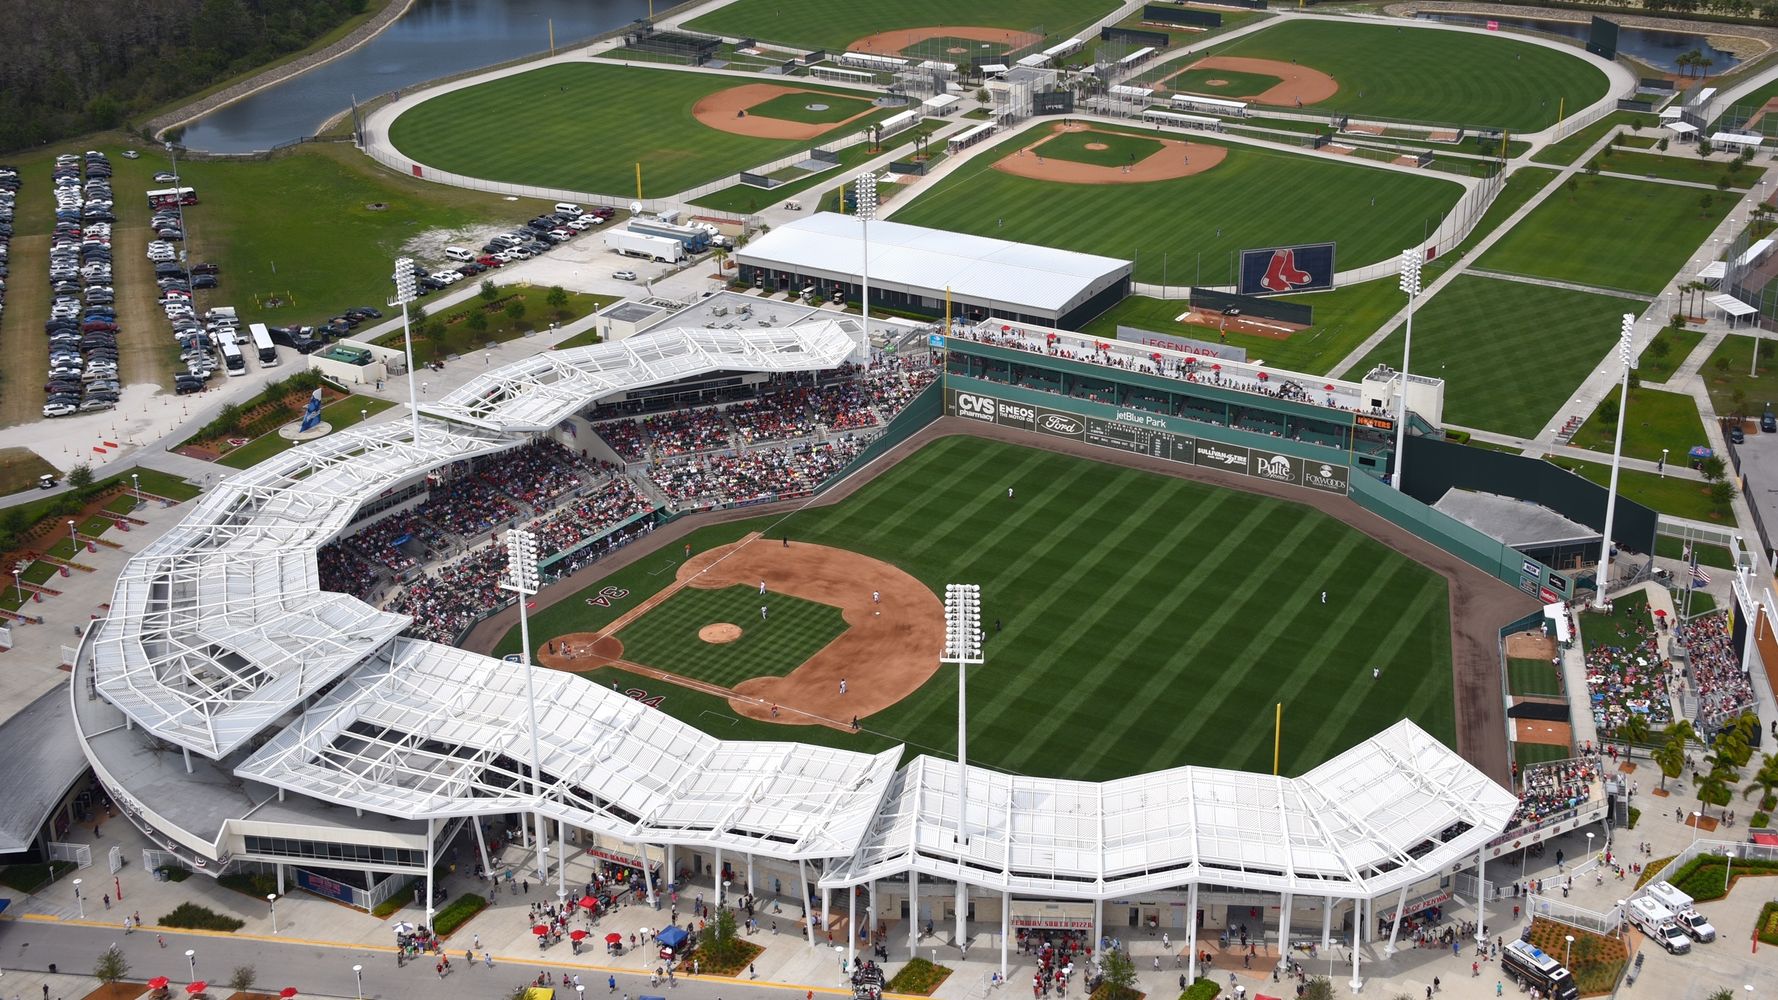 When It Comes To Building A New Ballpark, The Red Sox Get It Right